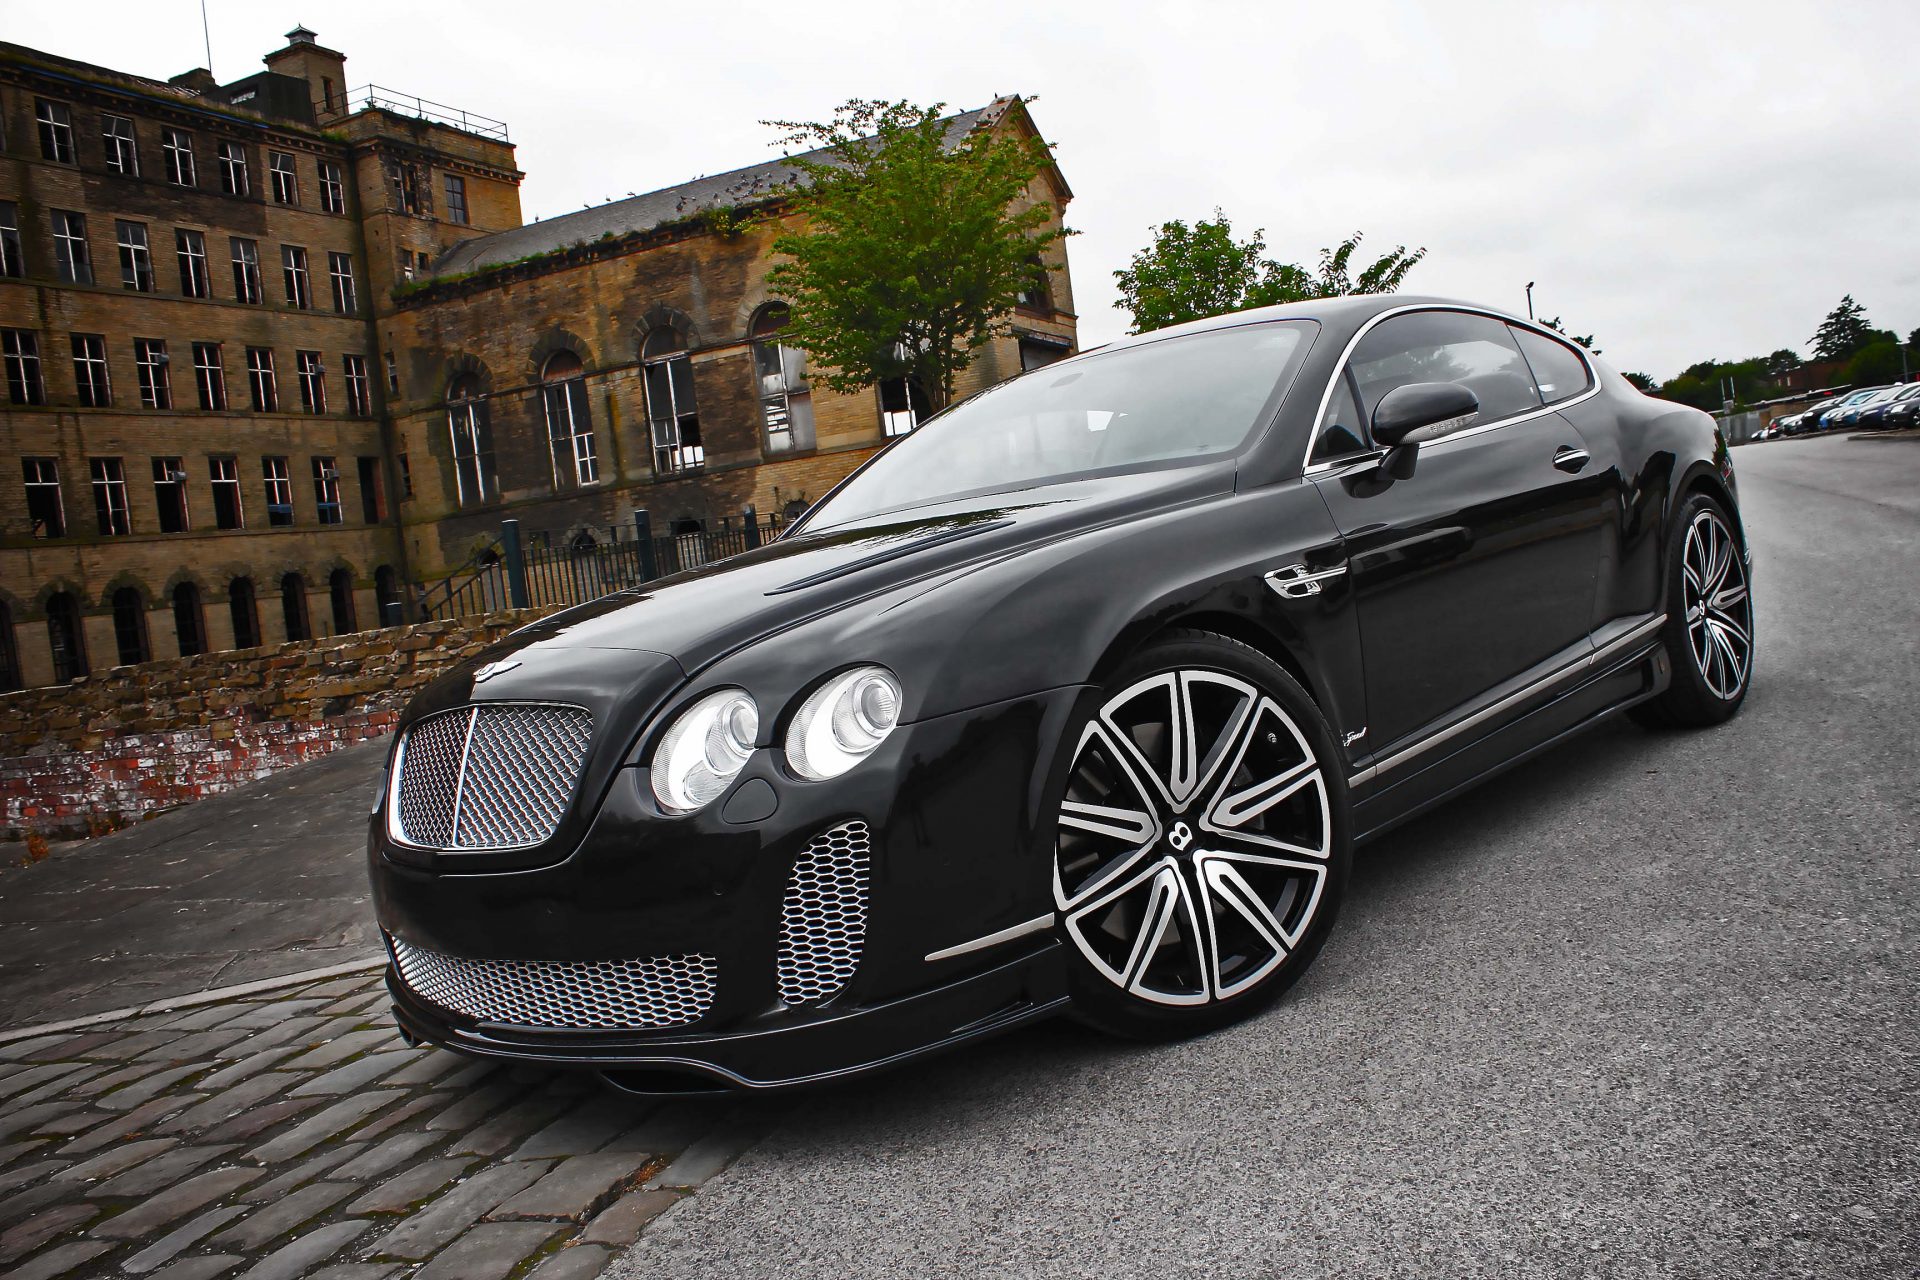 Check our price and buy Barugzai body kit for Bentley Continental GT!